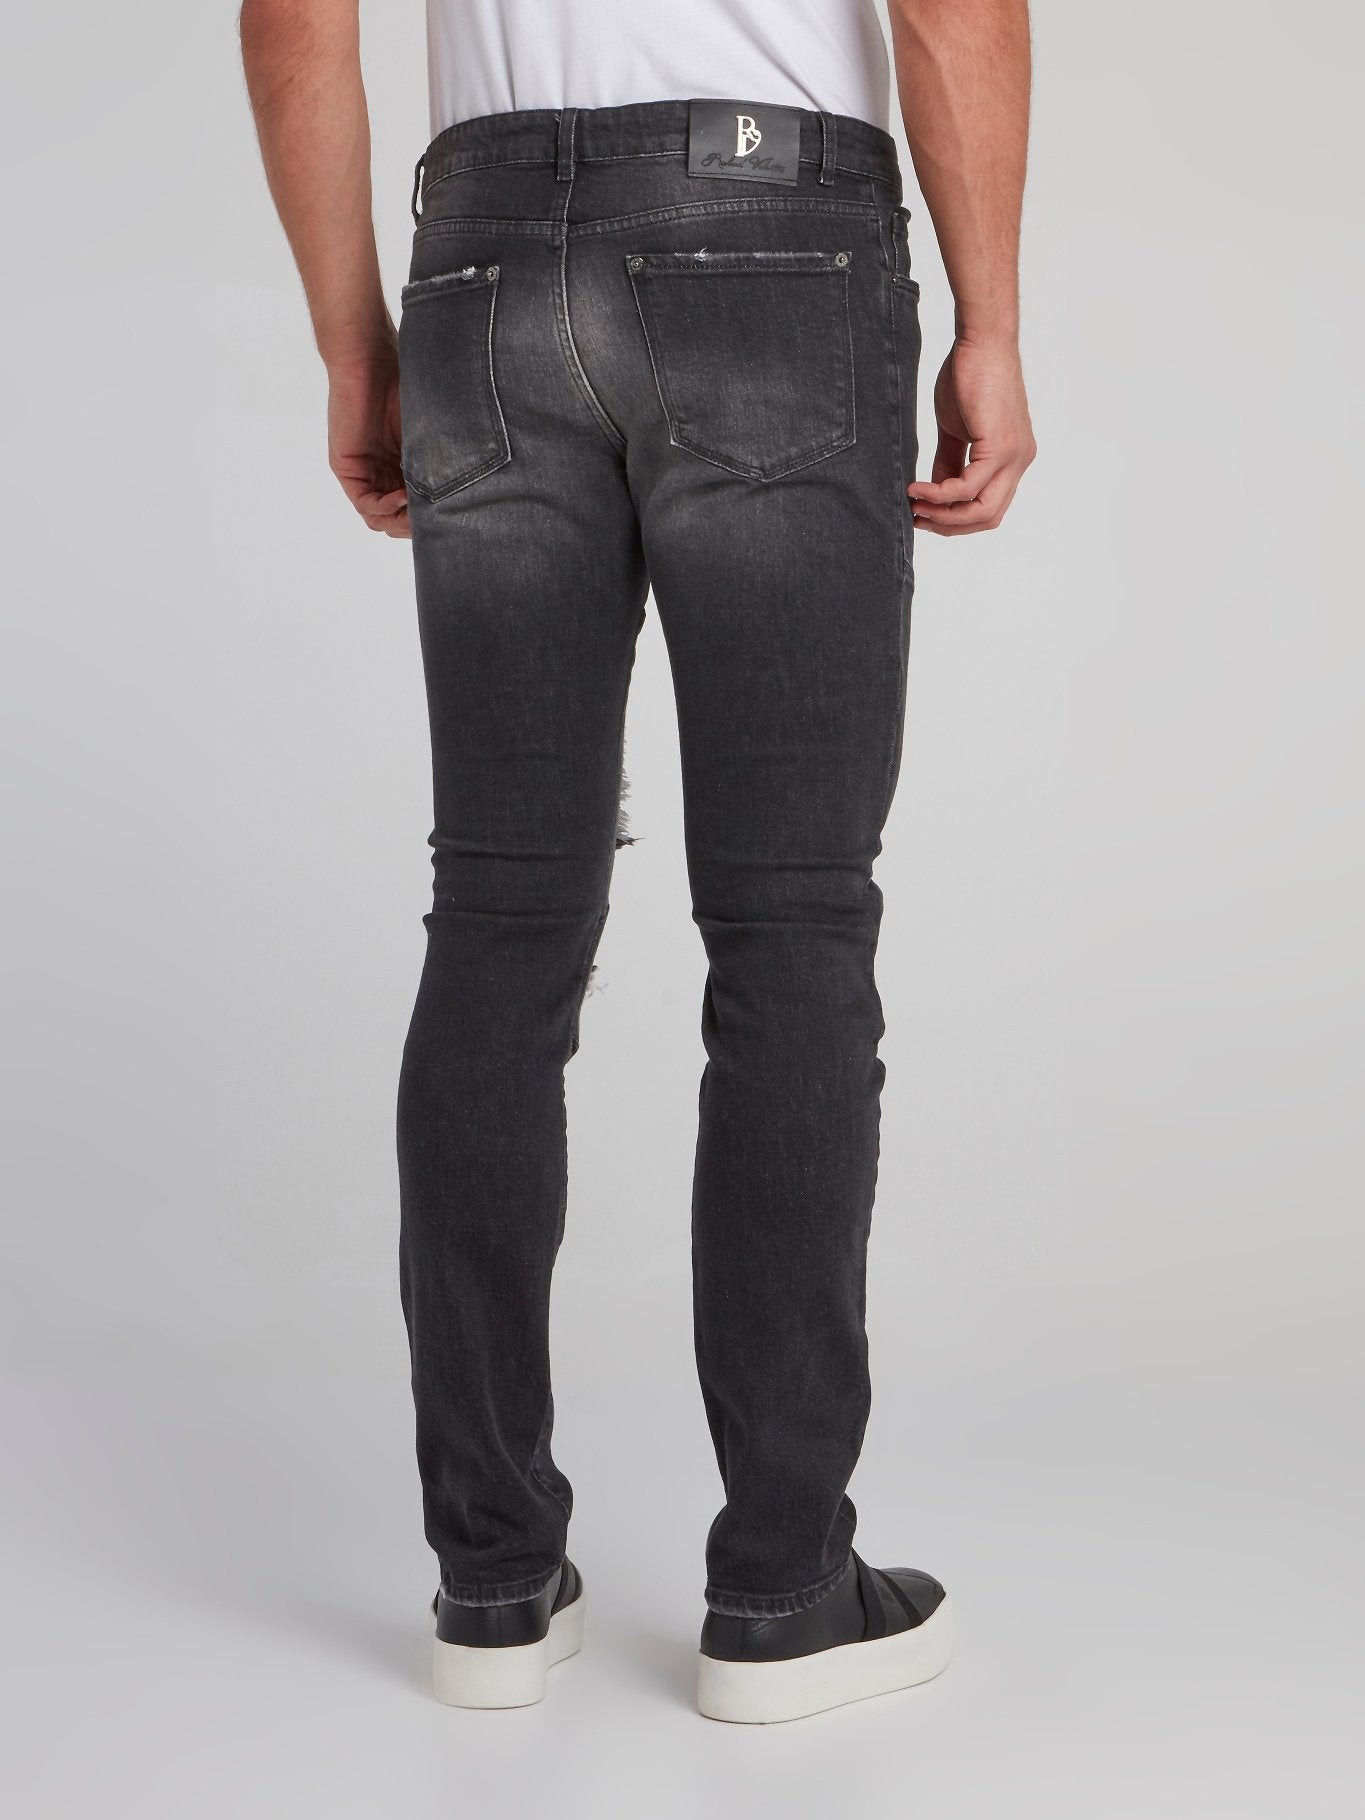 Feodor Black Patched Slim Fit Jeans